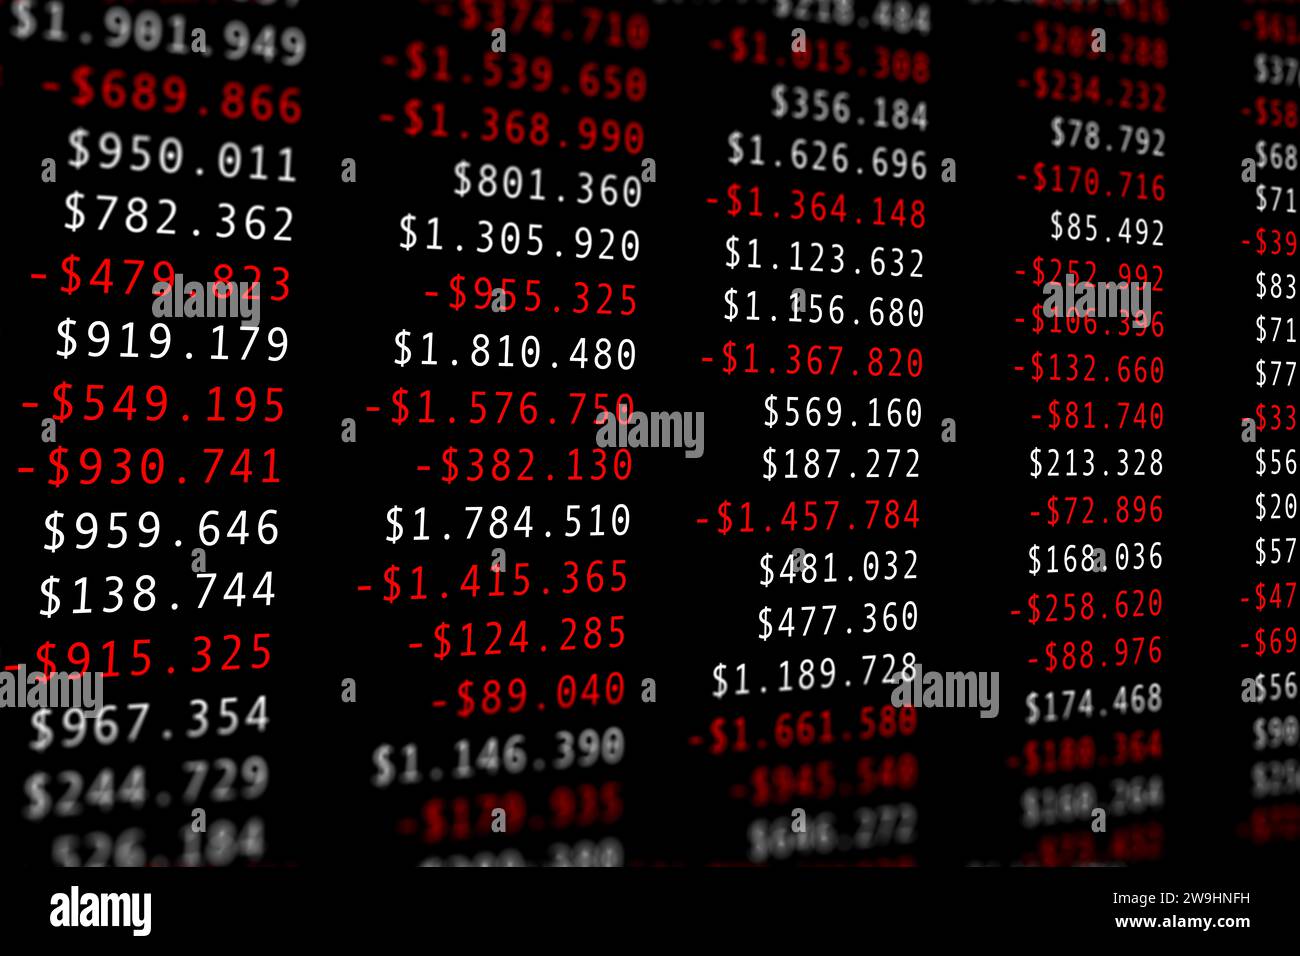 Highly complex data with dollar numbers from an accounting system. Symbolic for a volatile economic business environment during crisis and downturn. Stock Photo